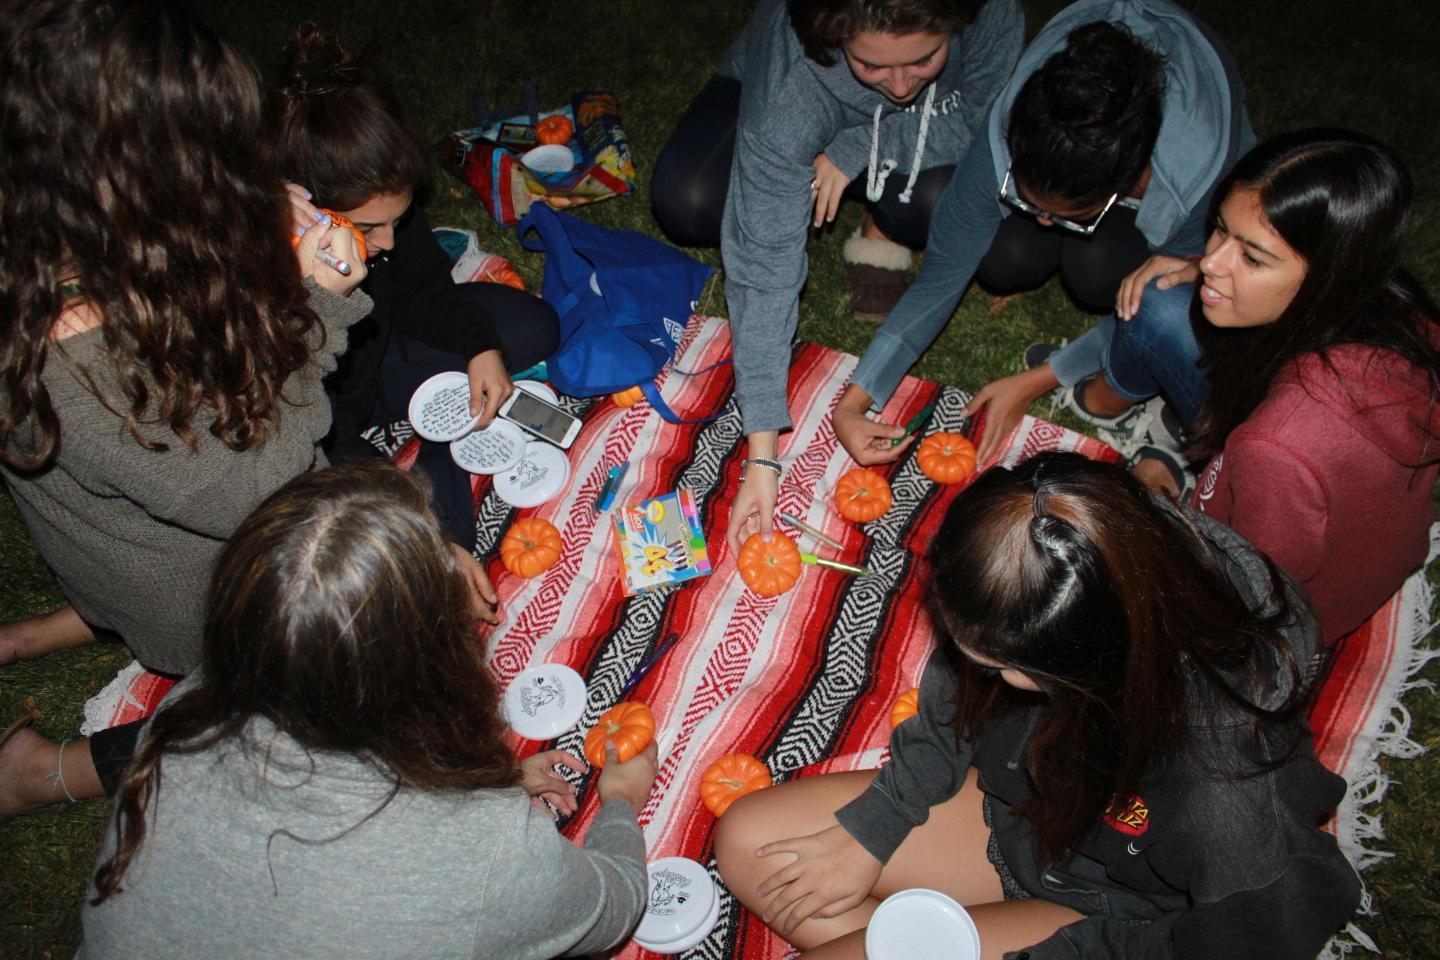 Overhead view of students sitting on a blanket and decorating pumpkins outside at night